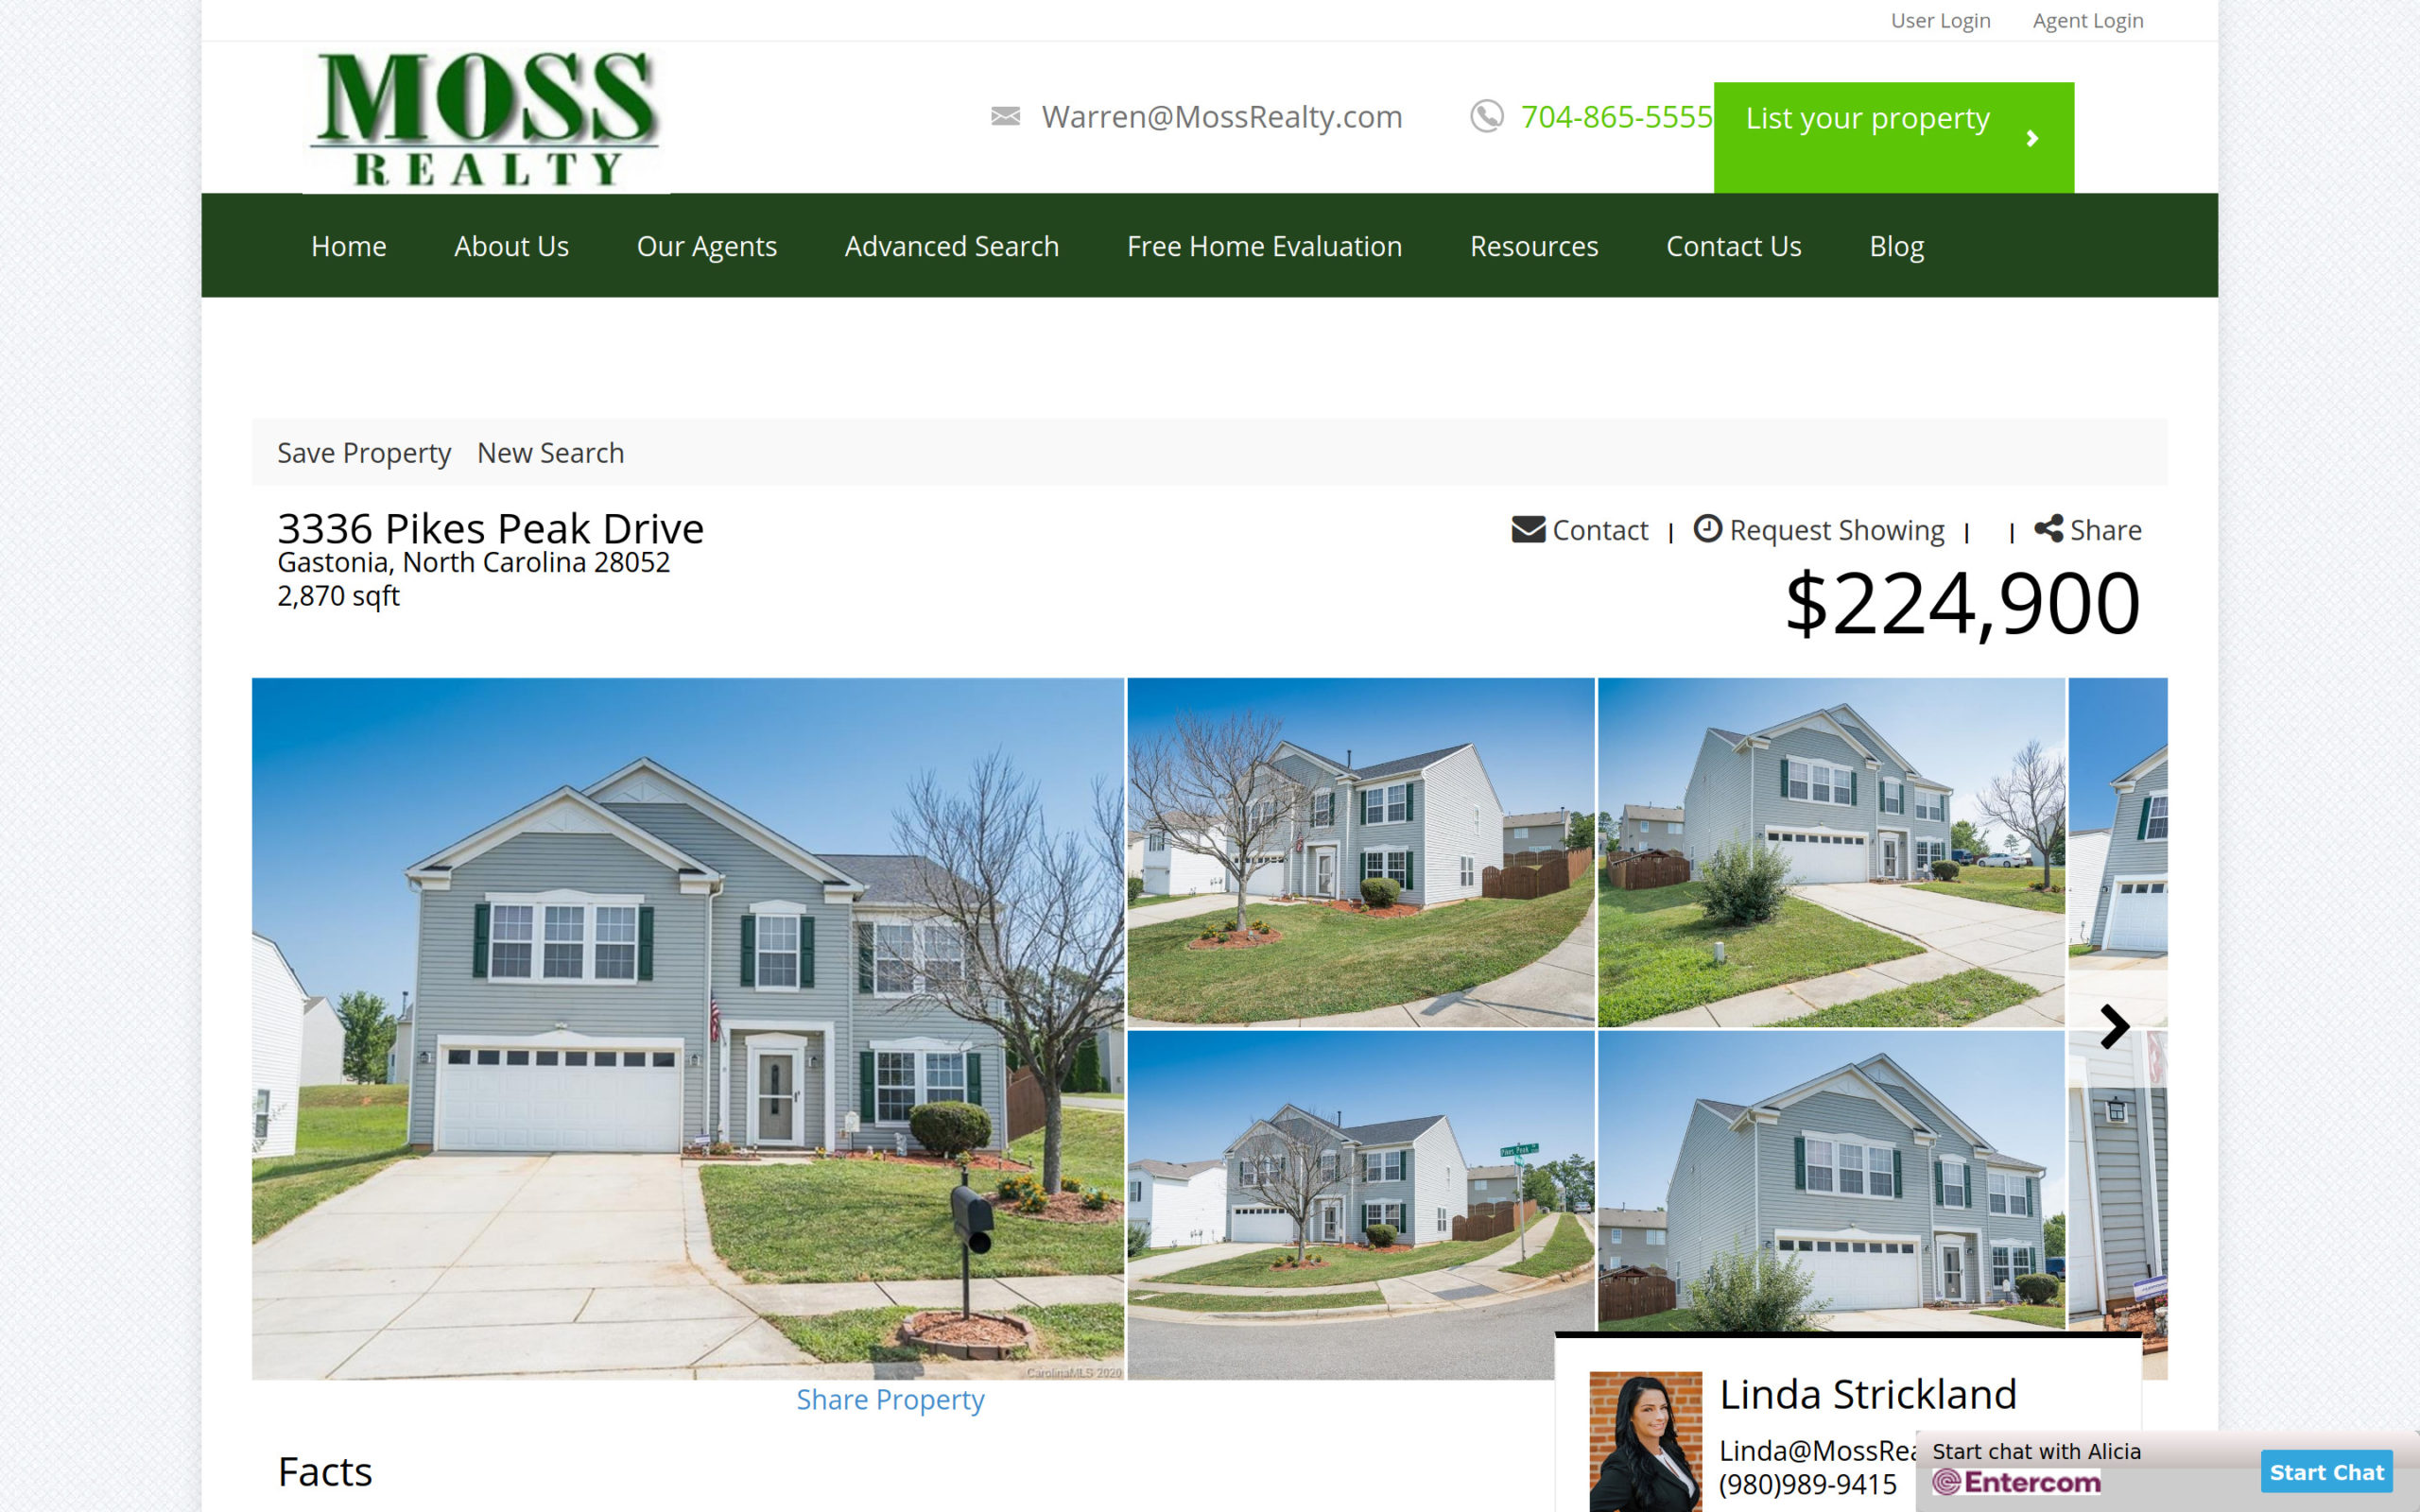 Moss Realty